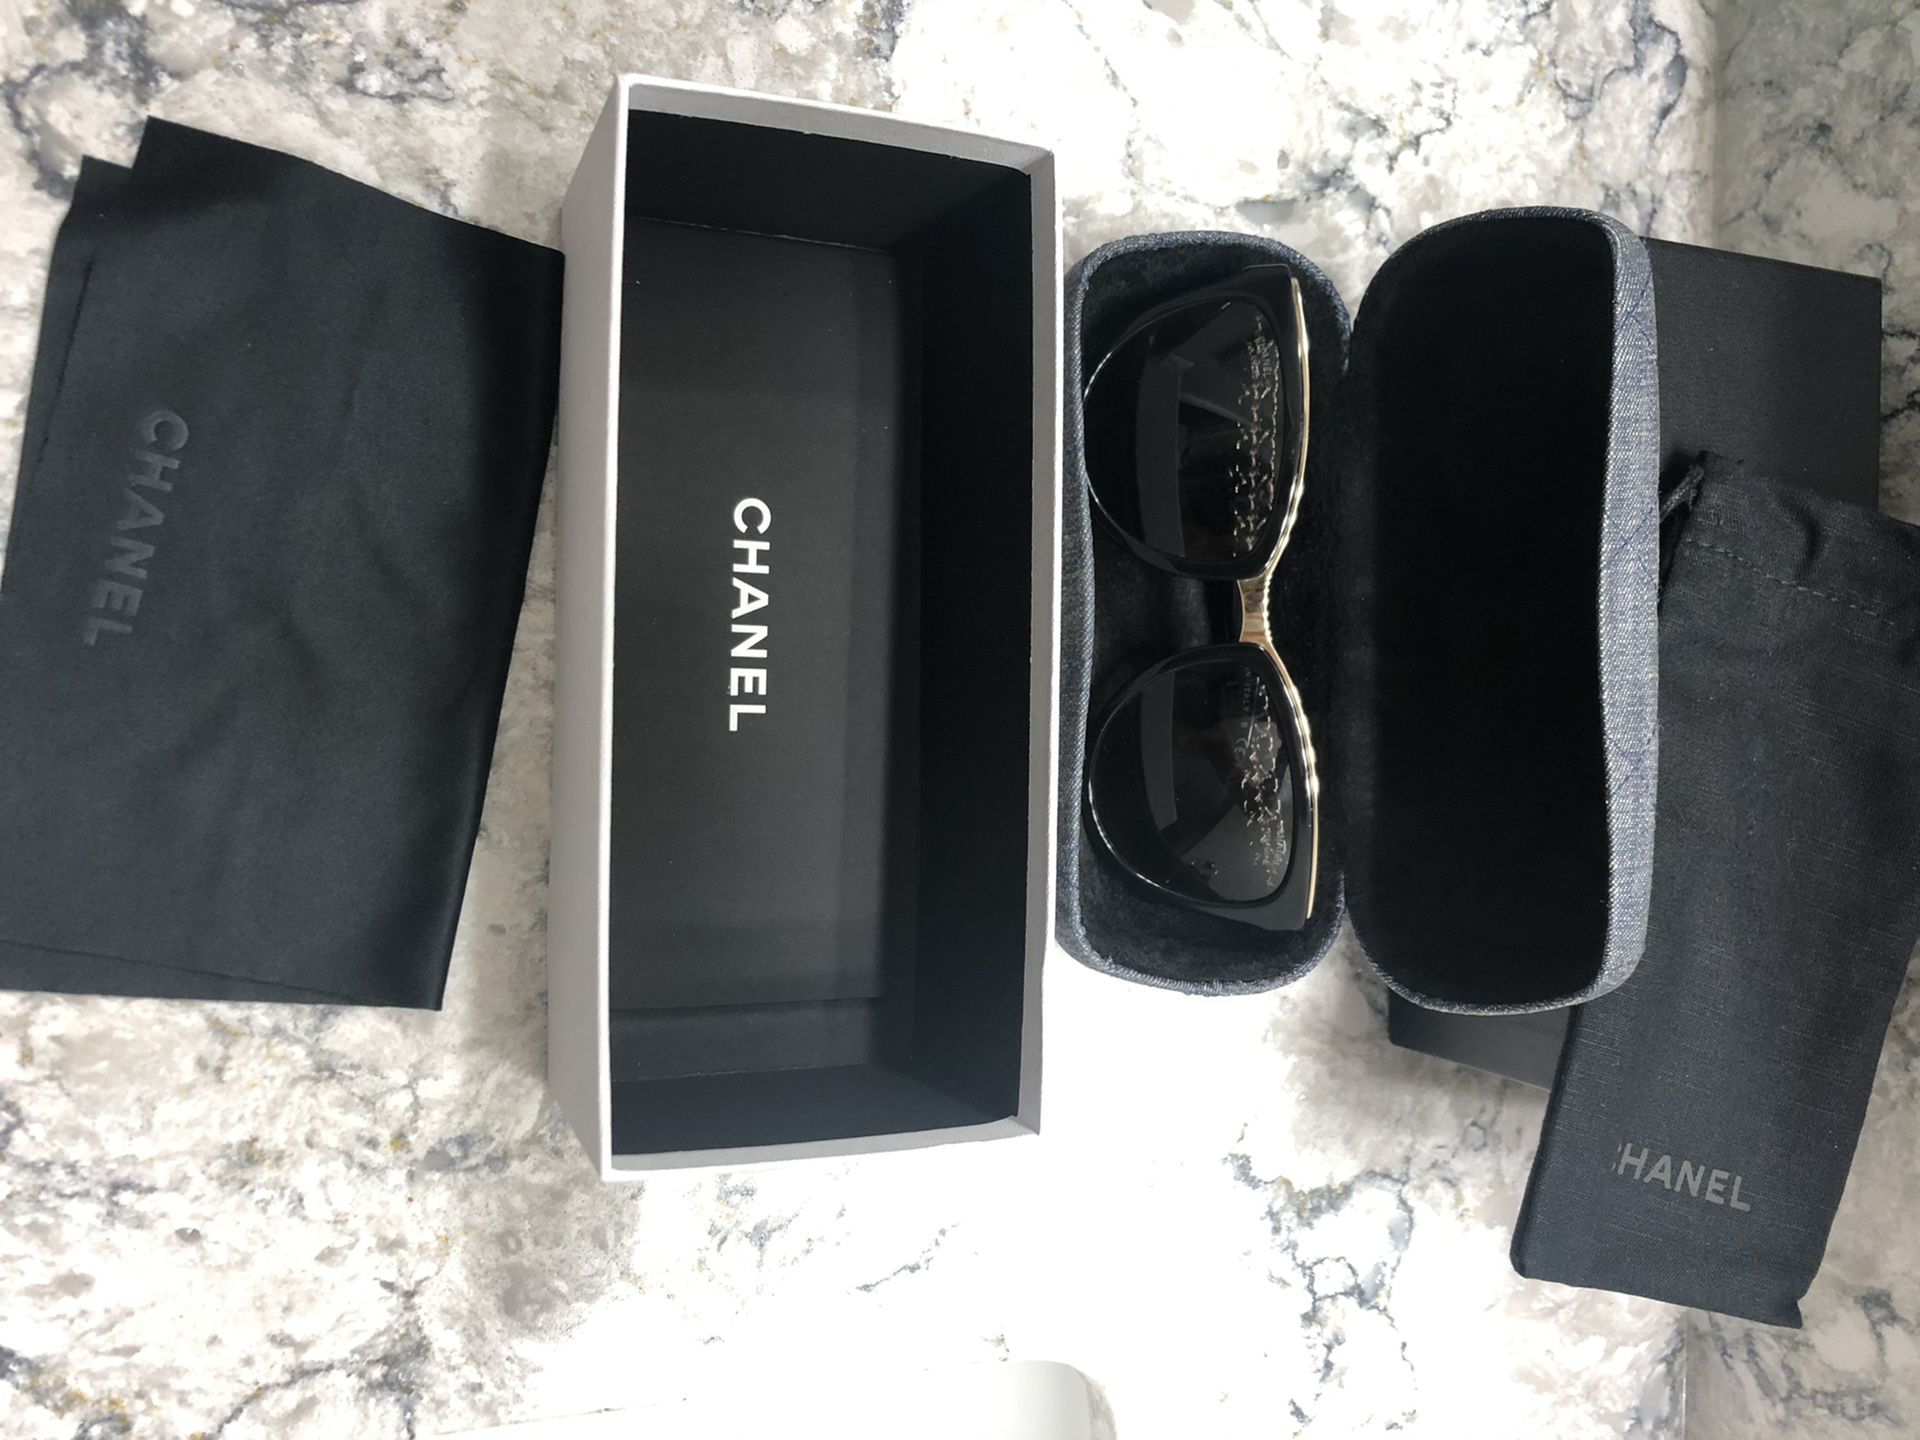 Chanel Chainlink Polarized Cat Eye Sunglasses - Excellent condition